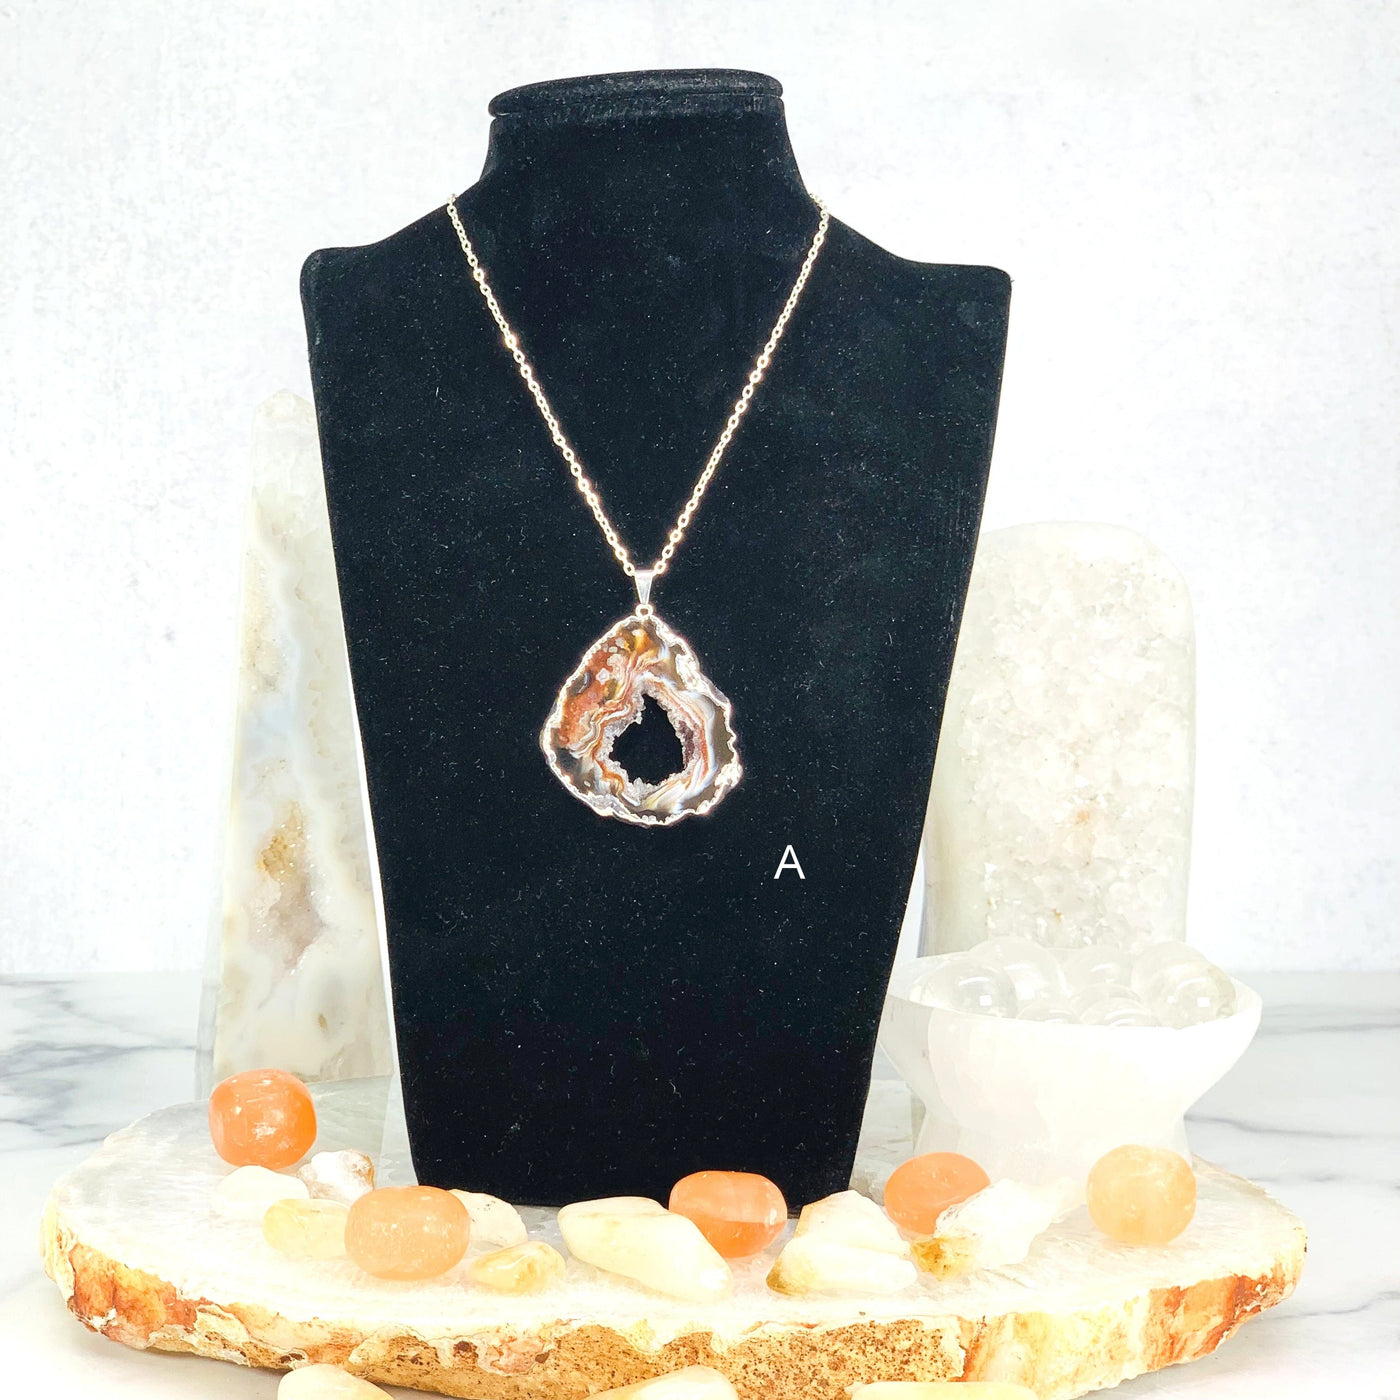 Display of Option A - Agate Druzy Slice Pendant with Electroplated Gold Edge